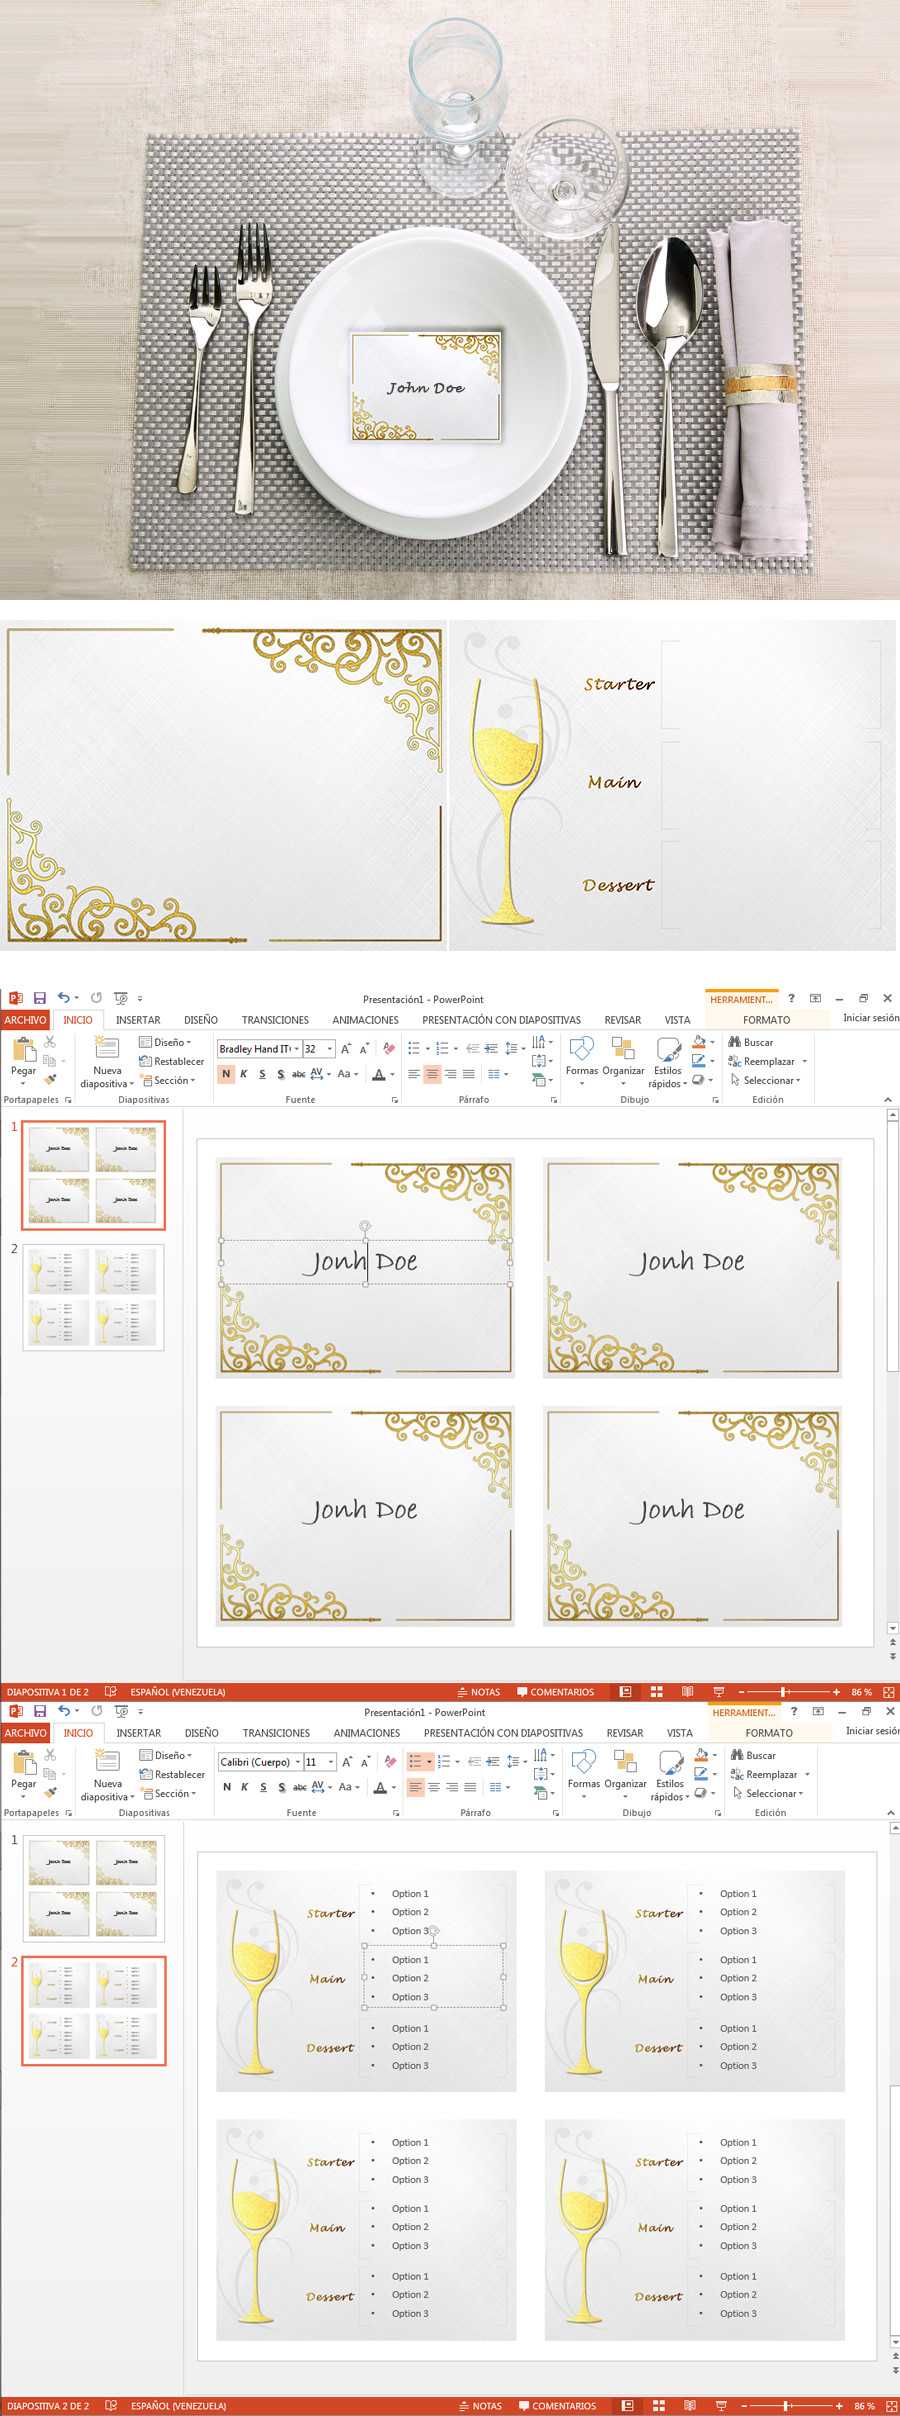 Place Card Template Needed For Microsoft Word – 2 Sided Inside Microsoft Word Place Card Template